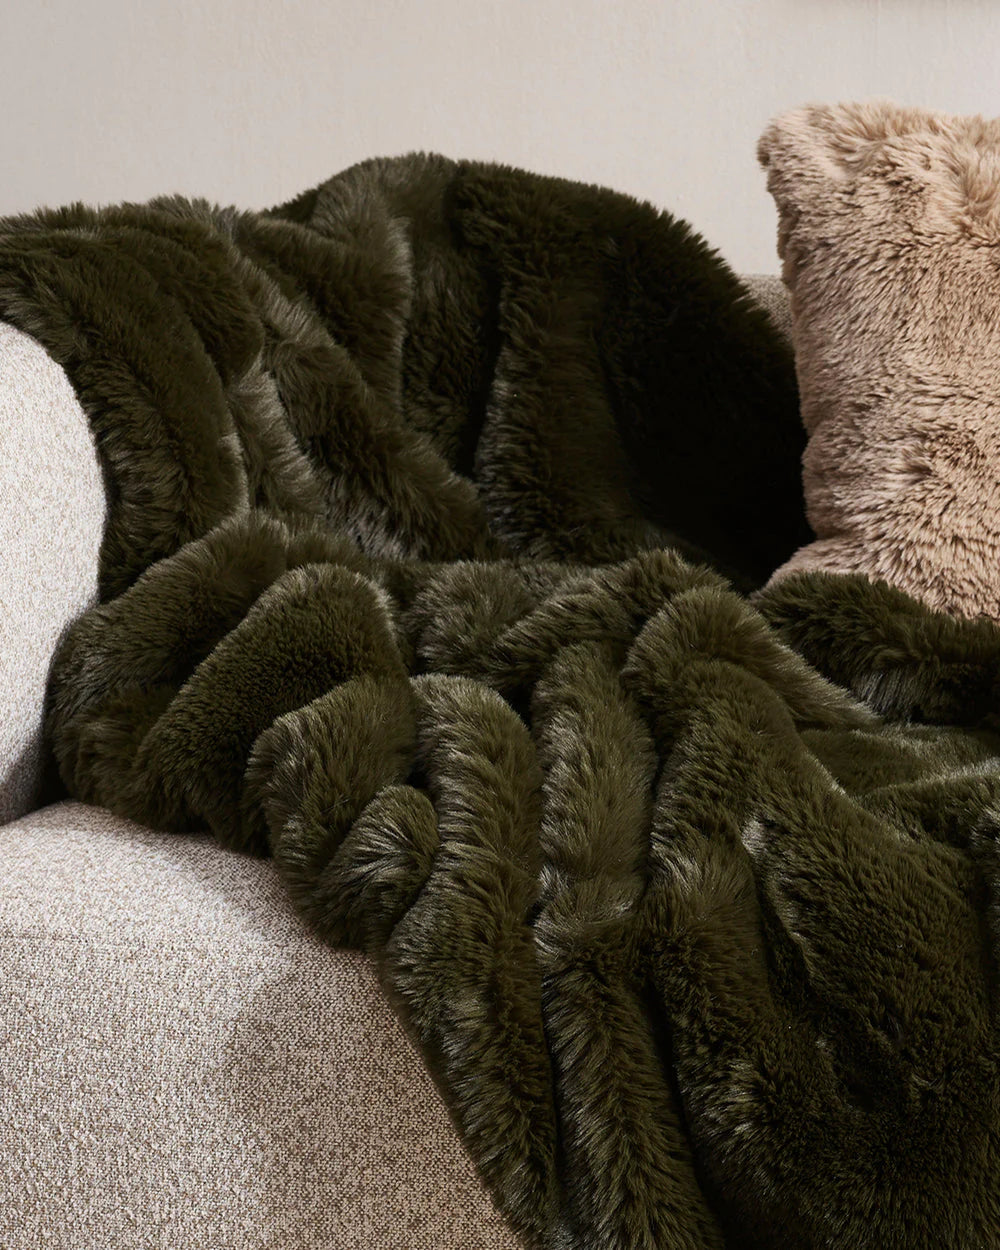 Baya Pele Faux Fur Seaweed Throw Rug Blanket is available from Make Your House A Home Premium Stockist. Furniture Store Bendigo, Victoria. Australia Wide Delivery. Furtex.